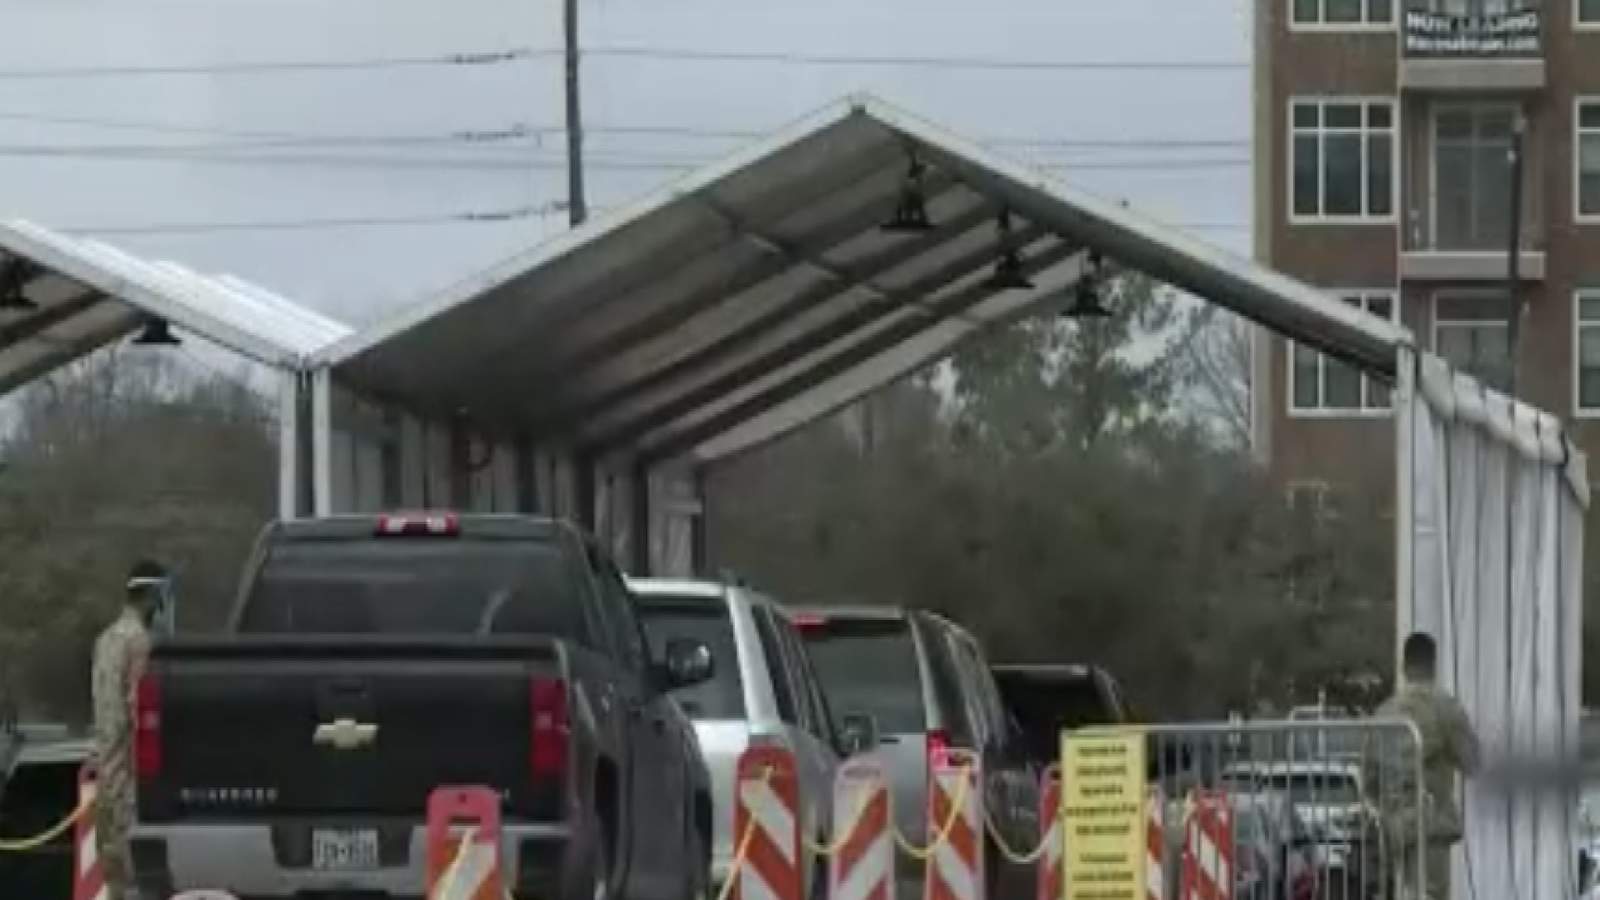 FEMA supersite at NRG Park continues to administer thousands of COVID-19 vaccine doses